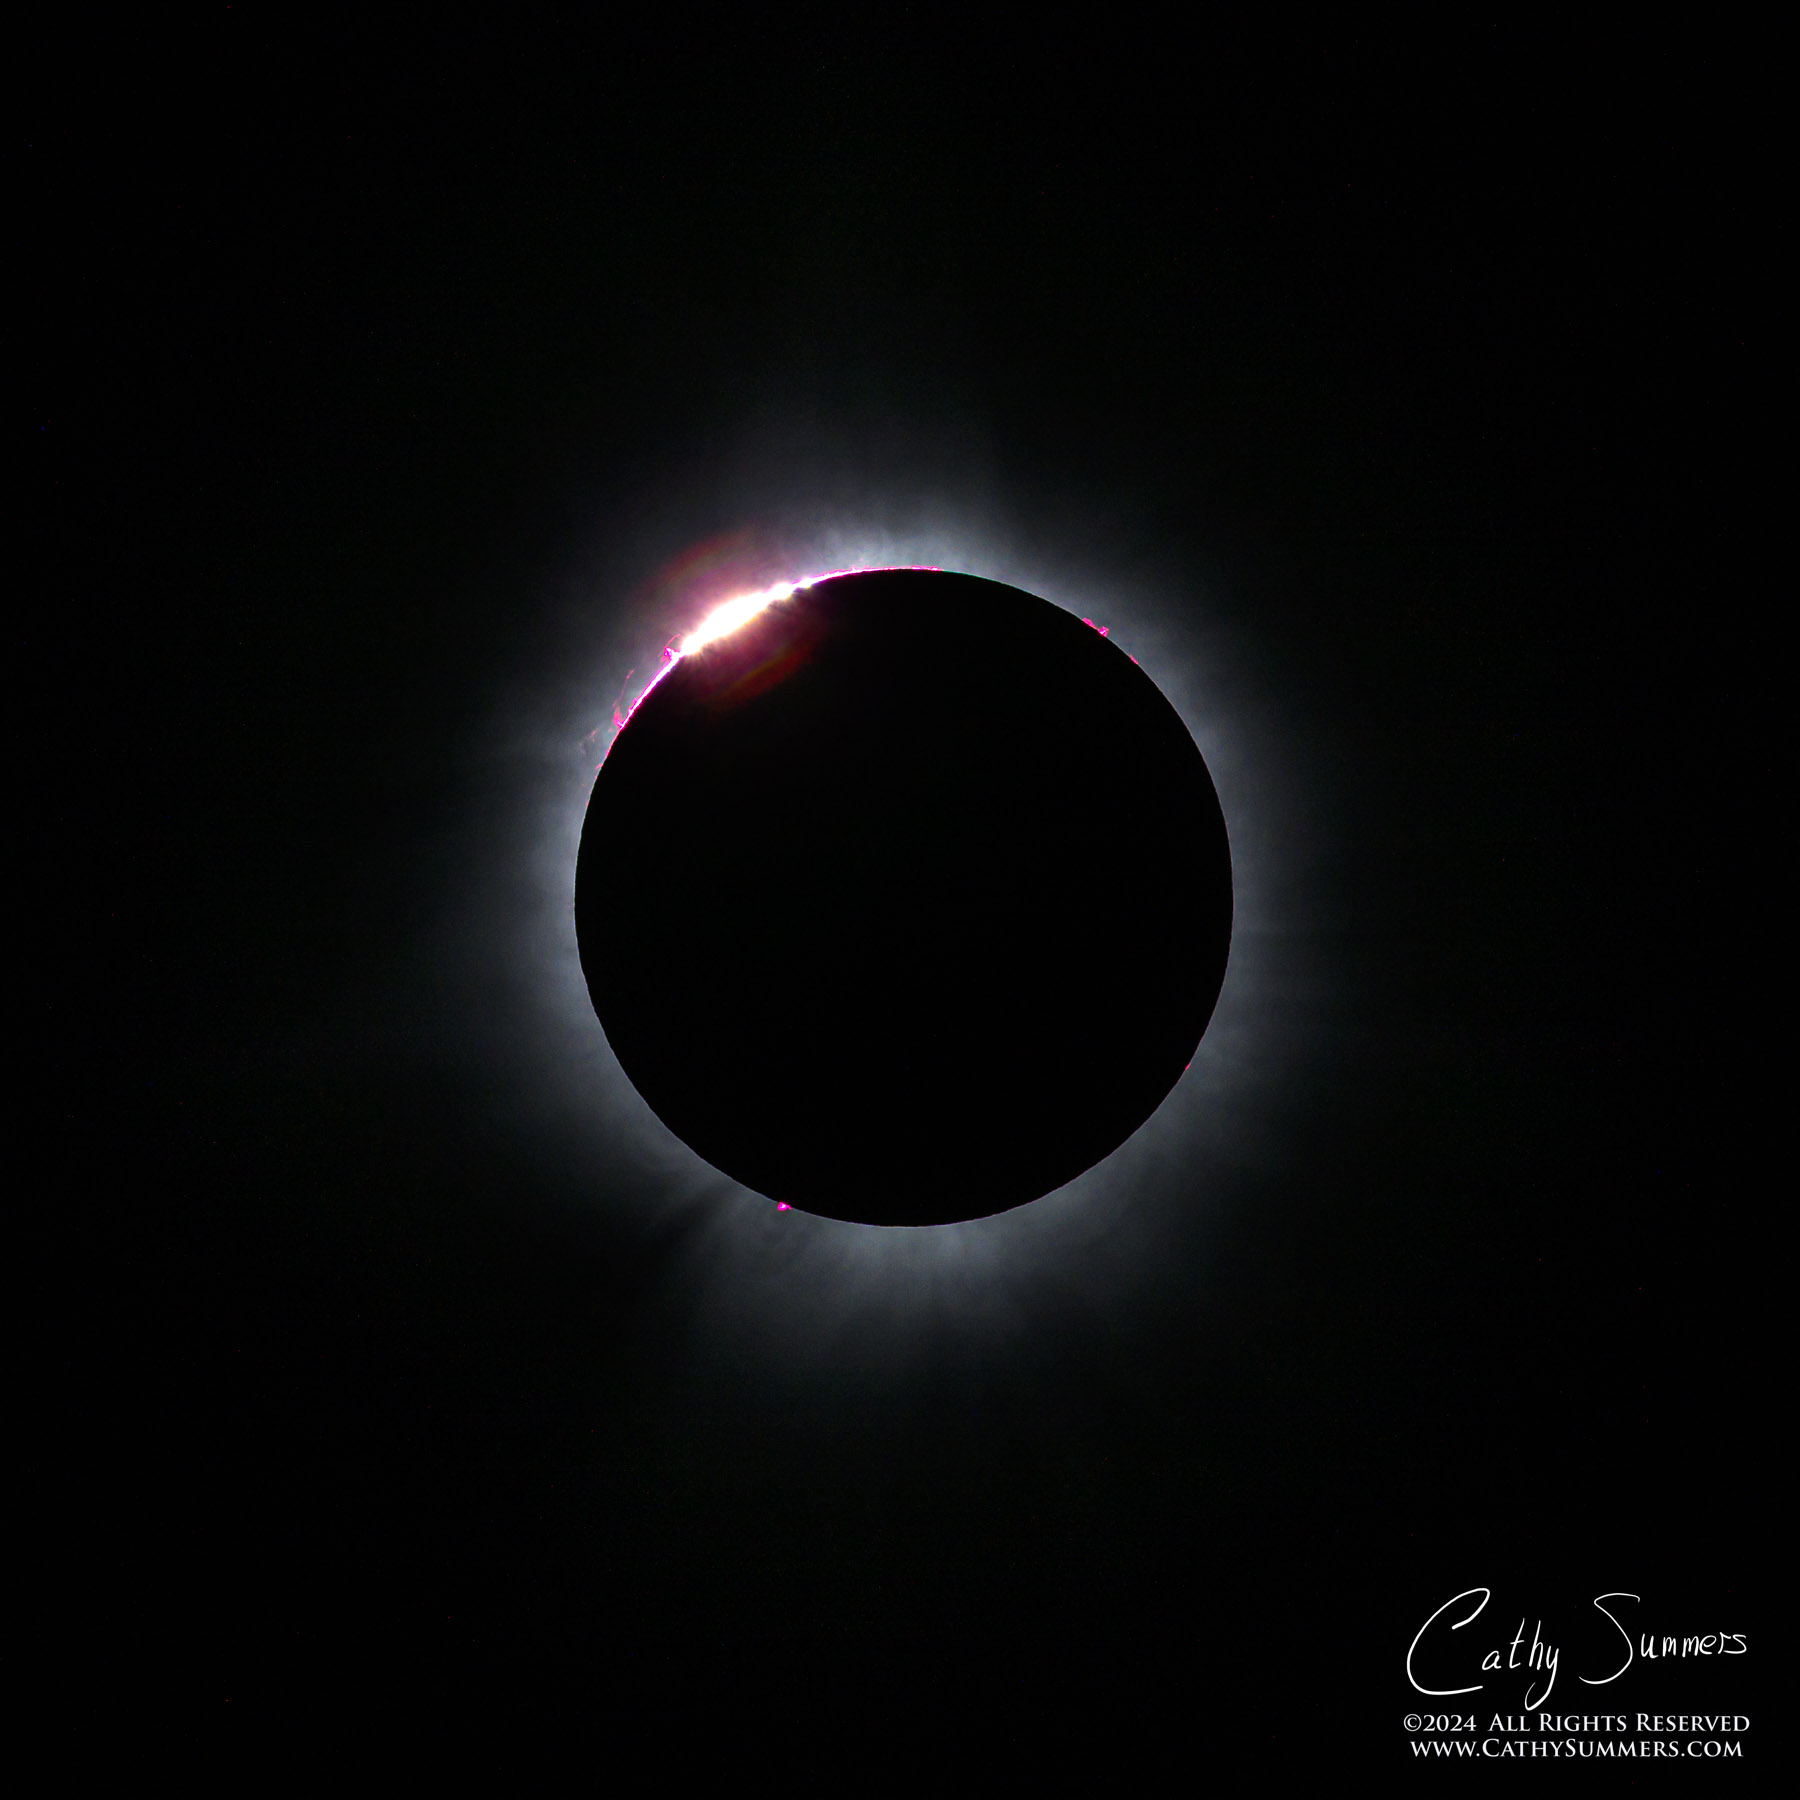 Diamond Ring, Baileys Beads and Solar Prominences During the 2024 Solar Eclipse as Totality Begins